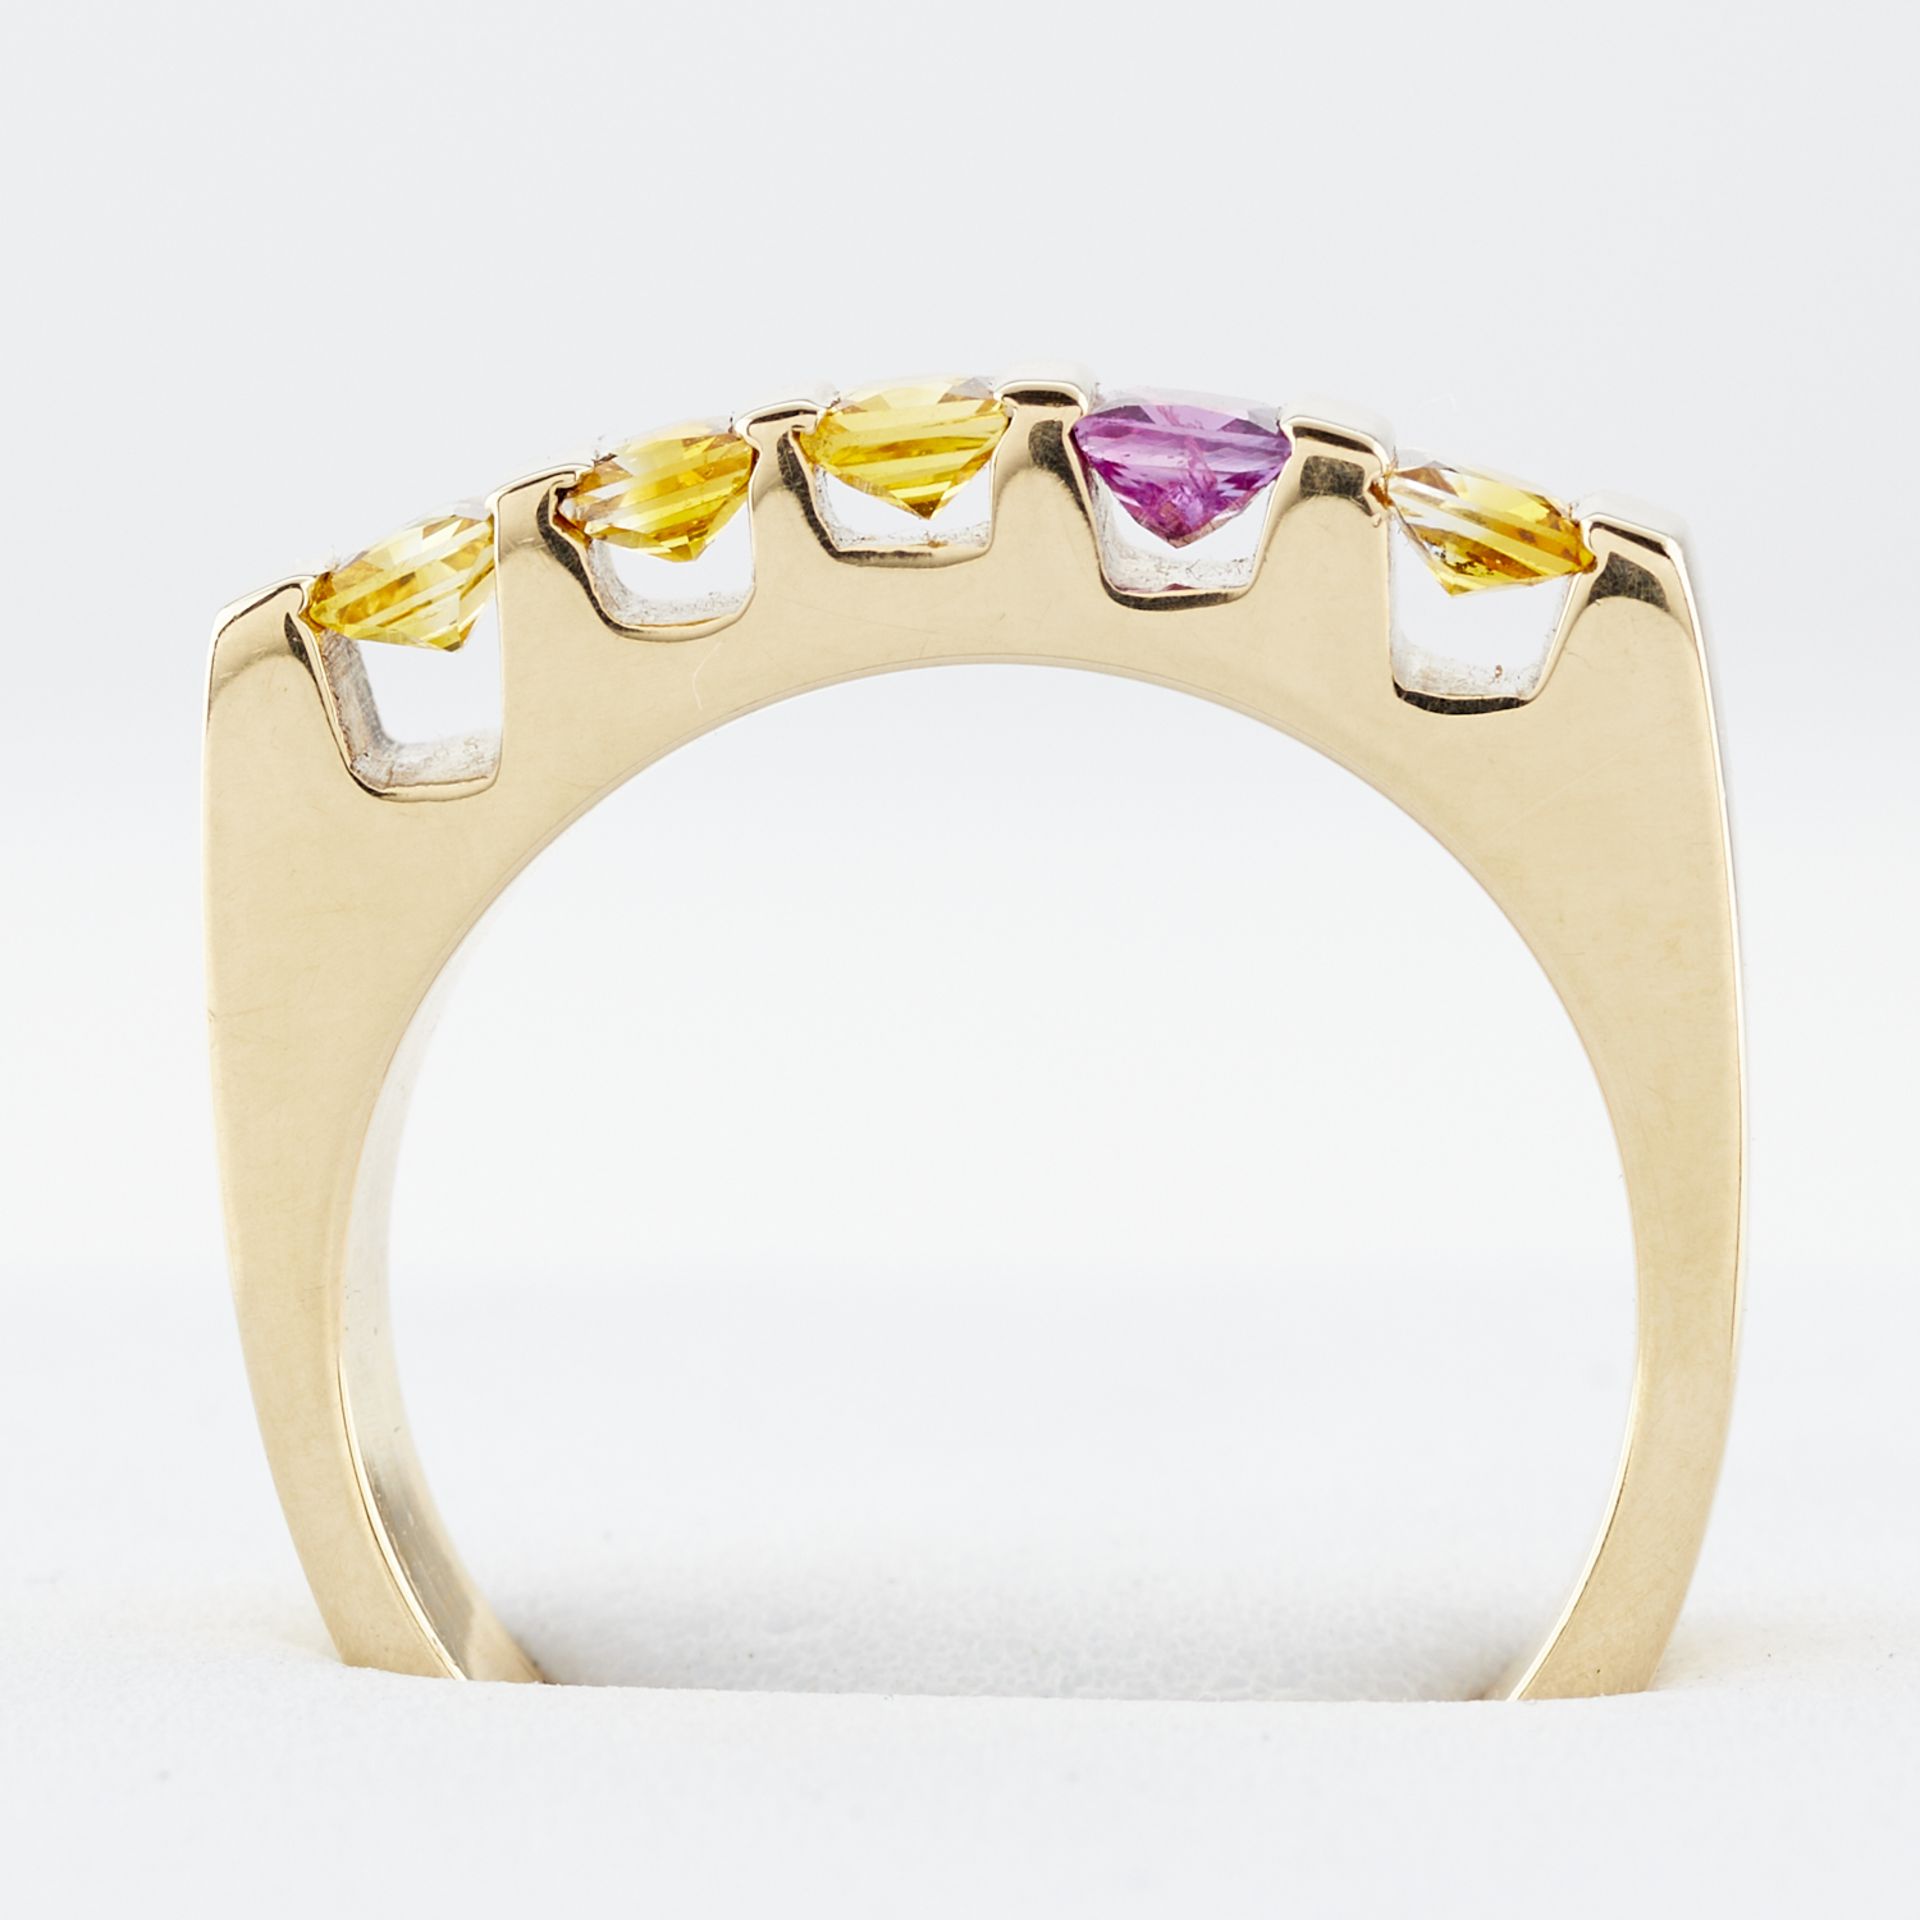 14k Yellow Gold & Sapphire Ring - Image 2 of 11